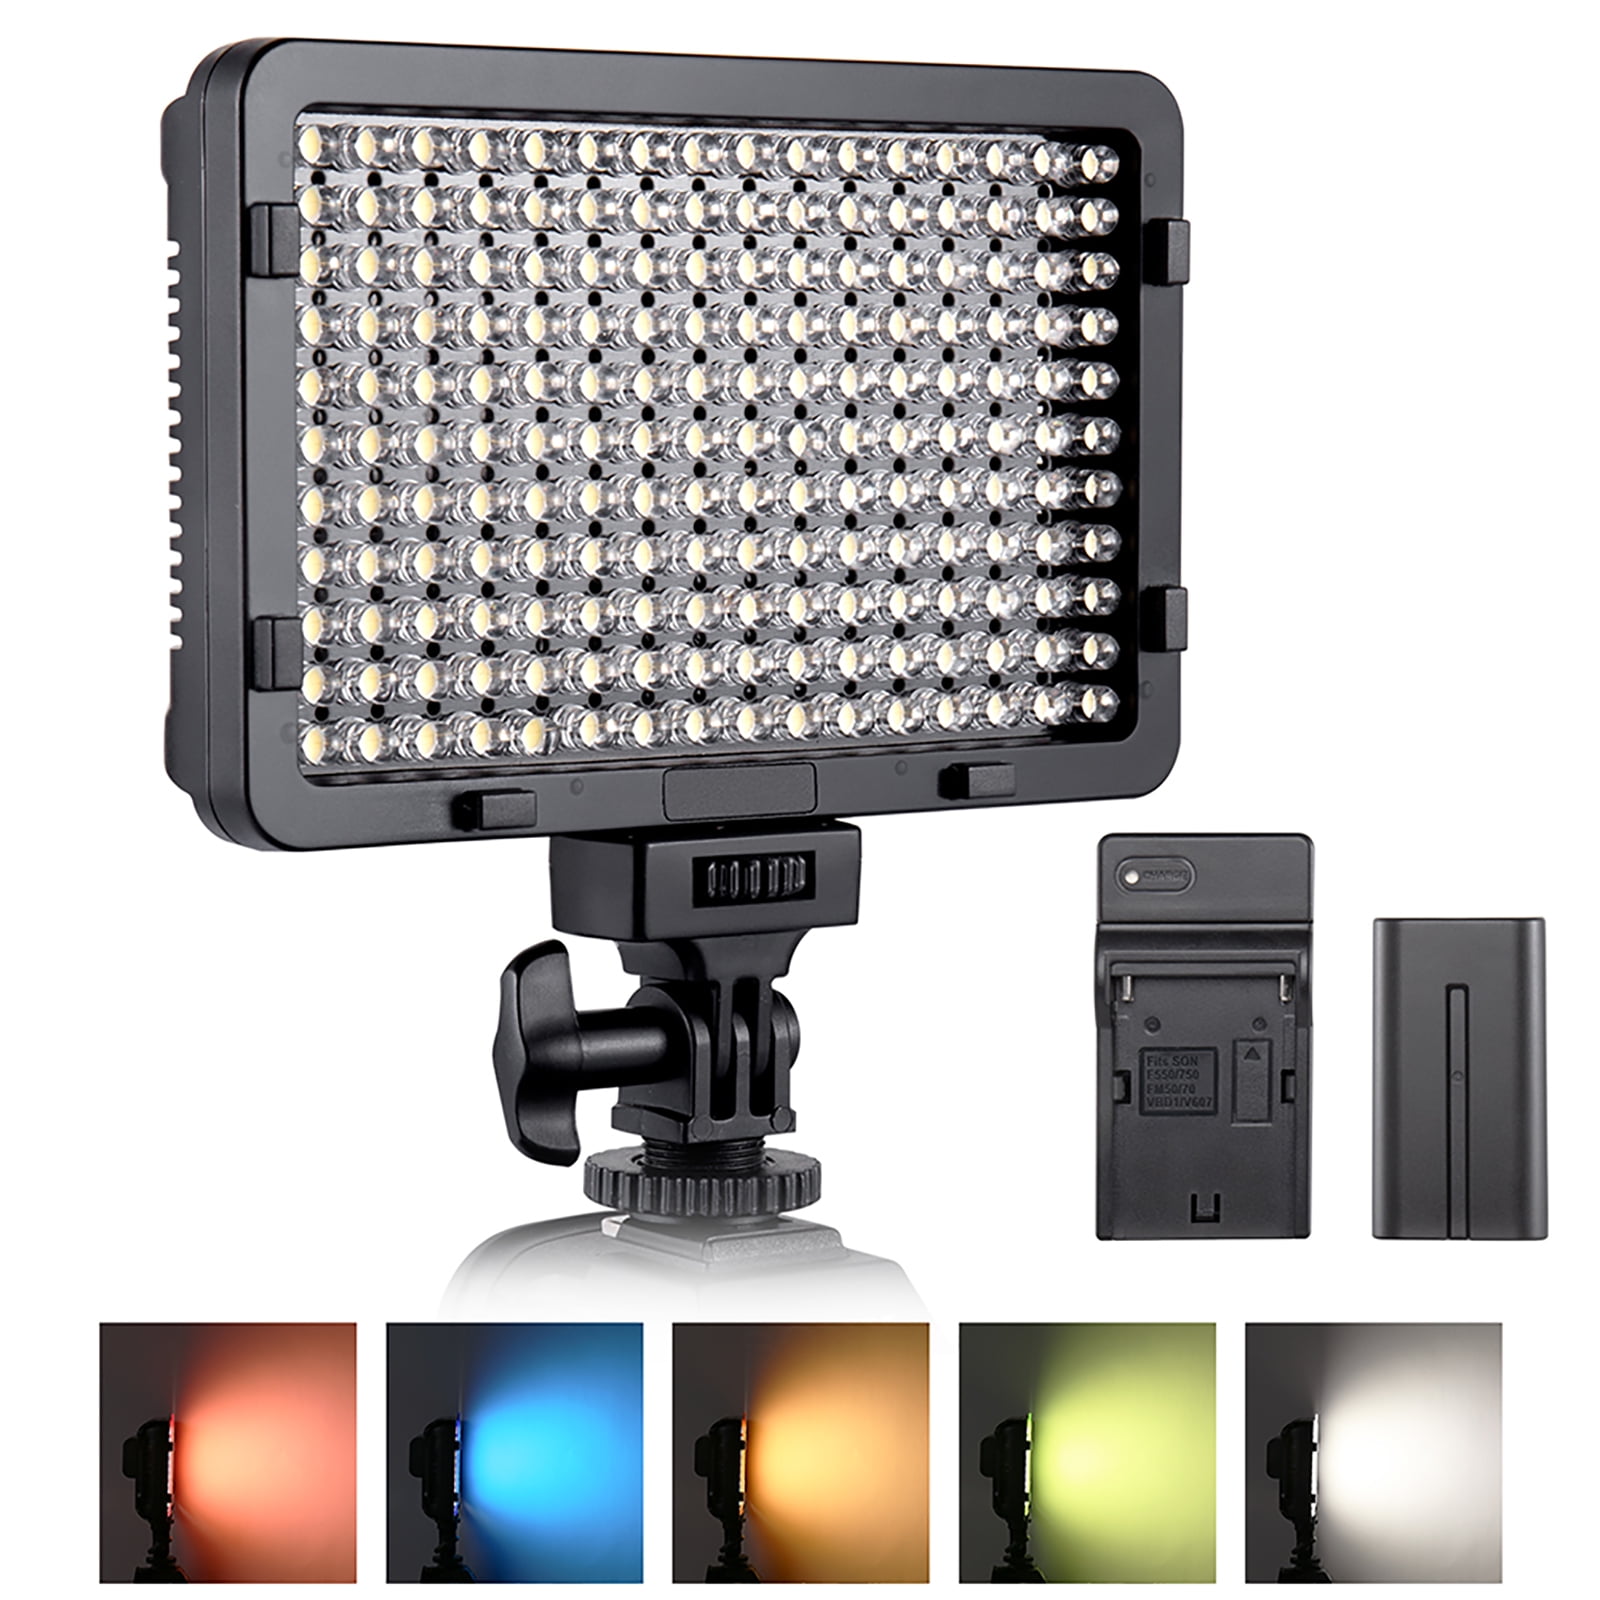 Pentax Panasonic ESDDI 177 LED Ultra Bright Dimmable Camera Panel Light with Battery and USB Cable for Canon LED Video Light Nikon Sony Samsung Olympus and All DSLR Cameras 